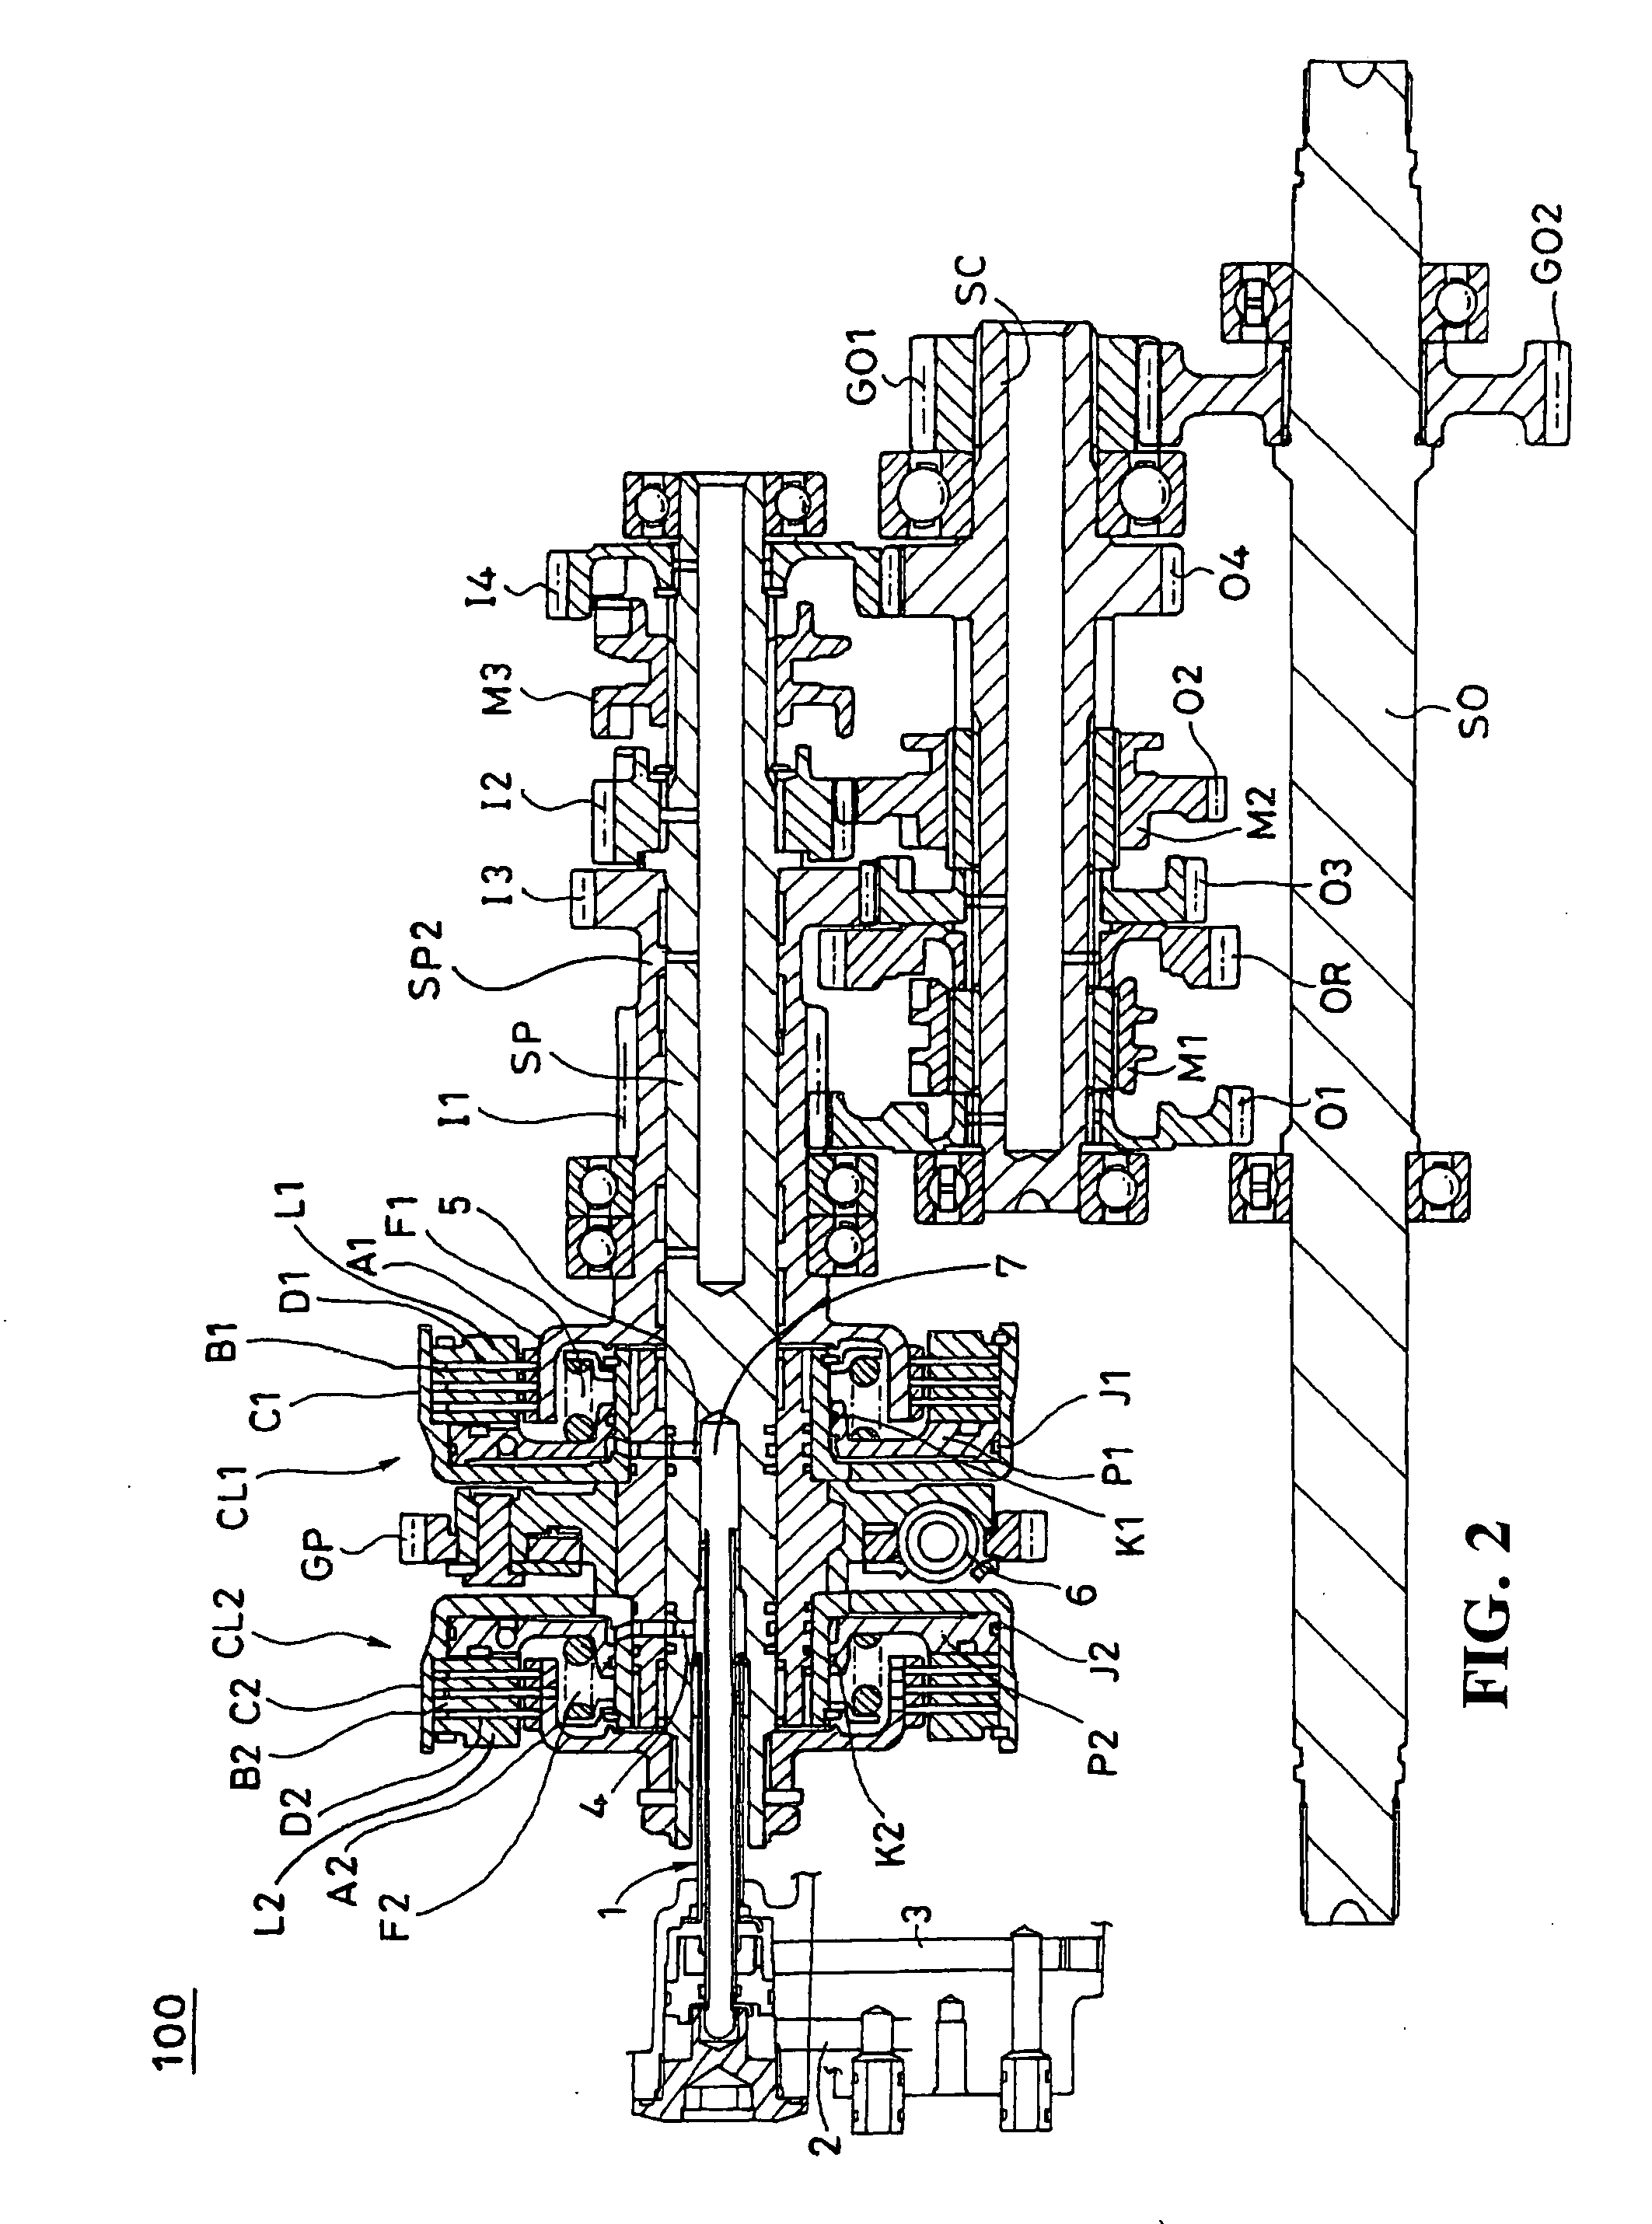 Sequential automatic transmission